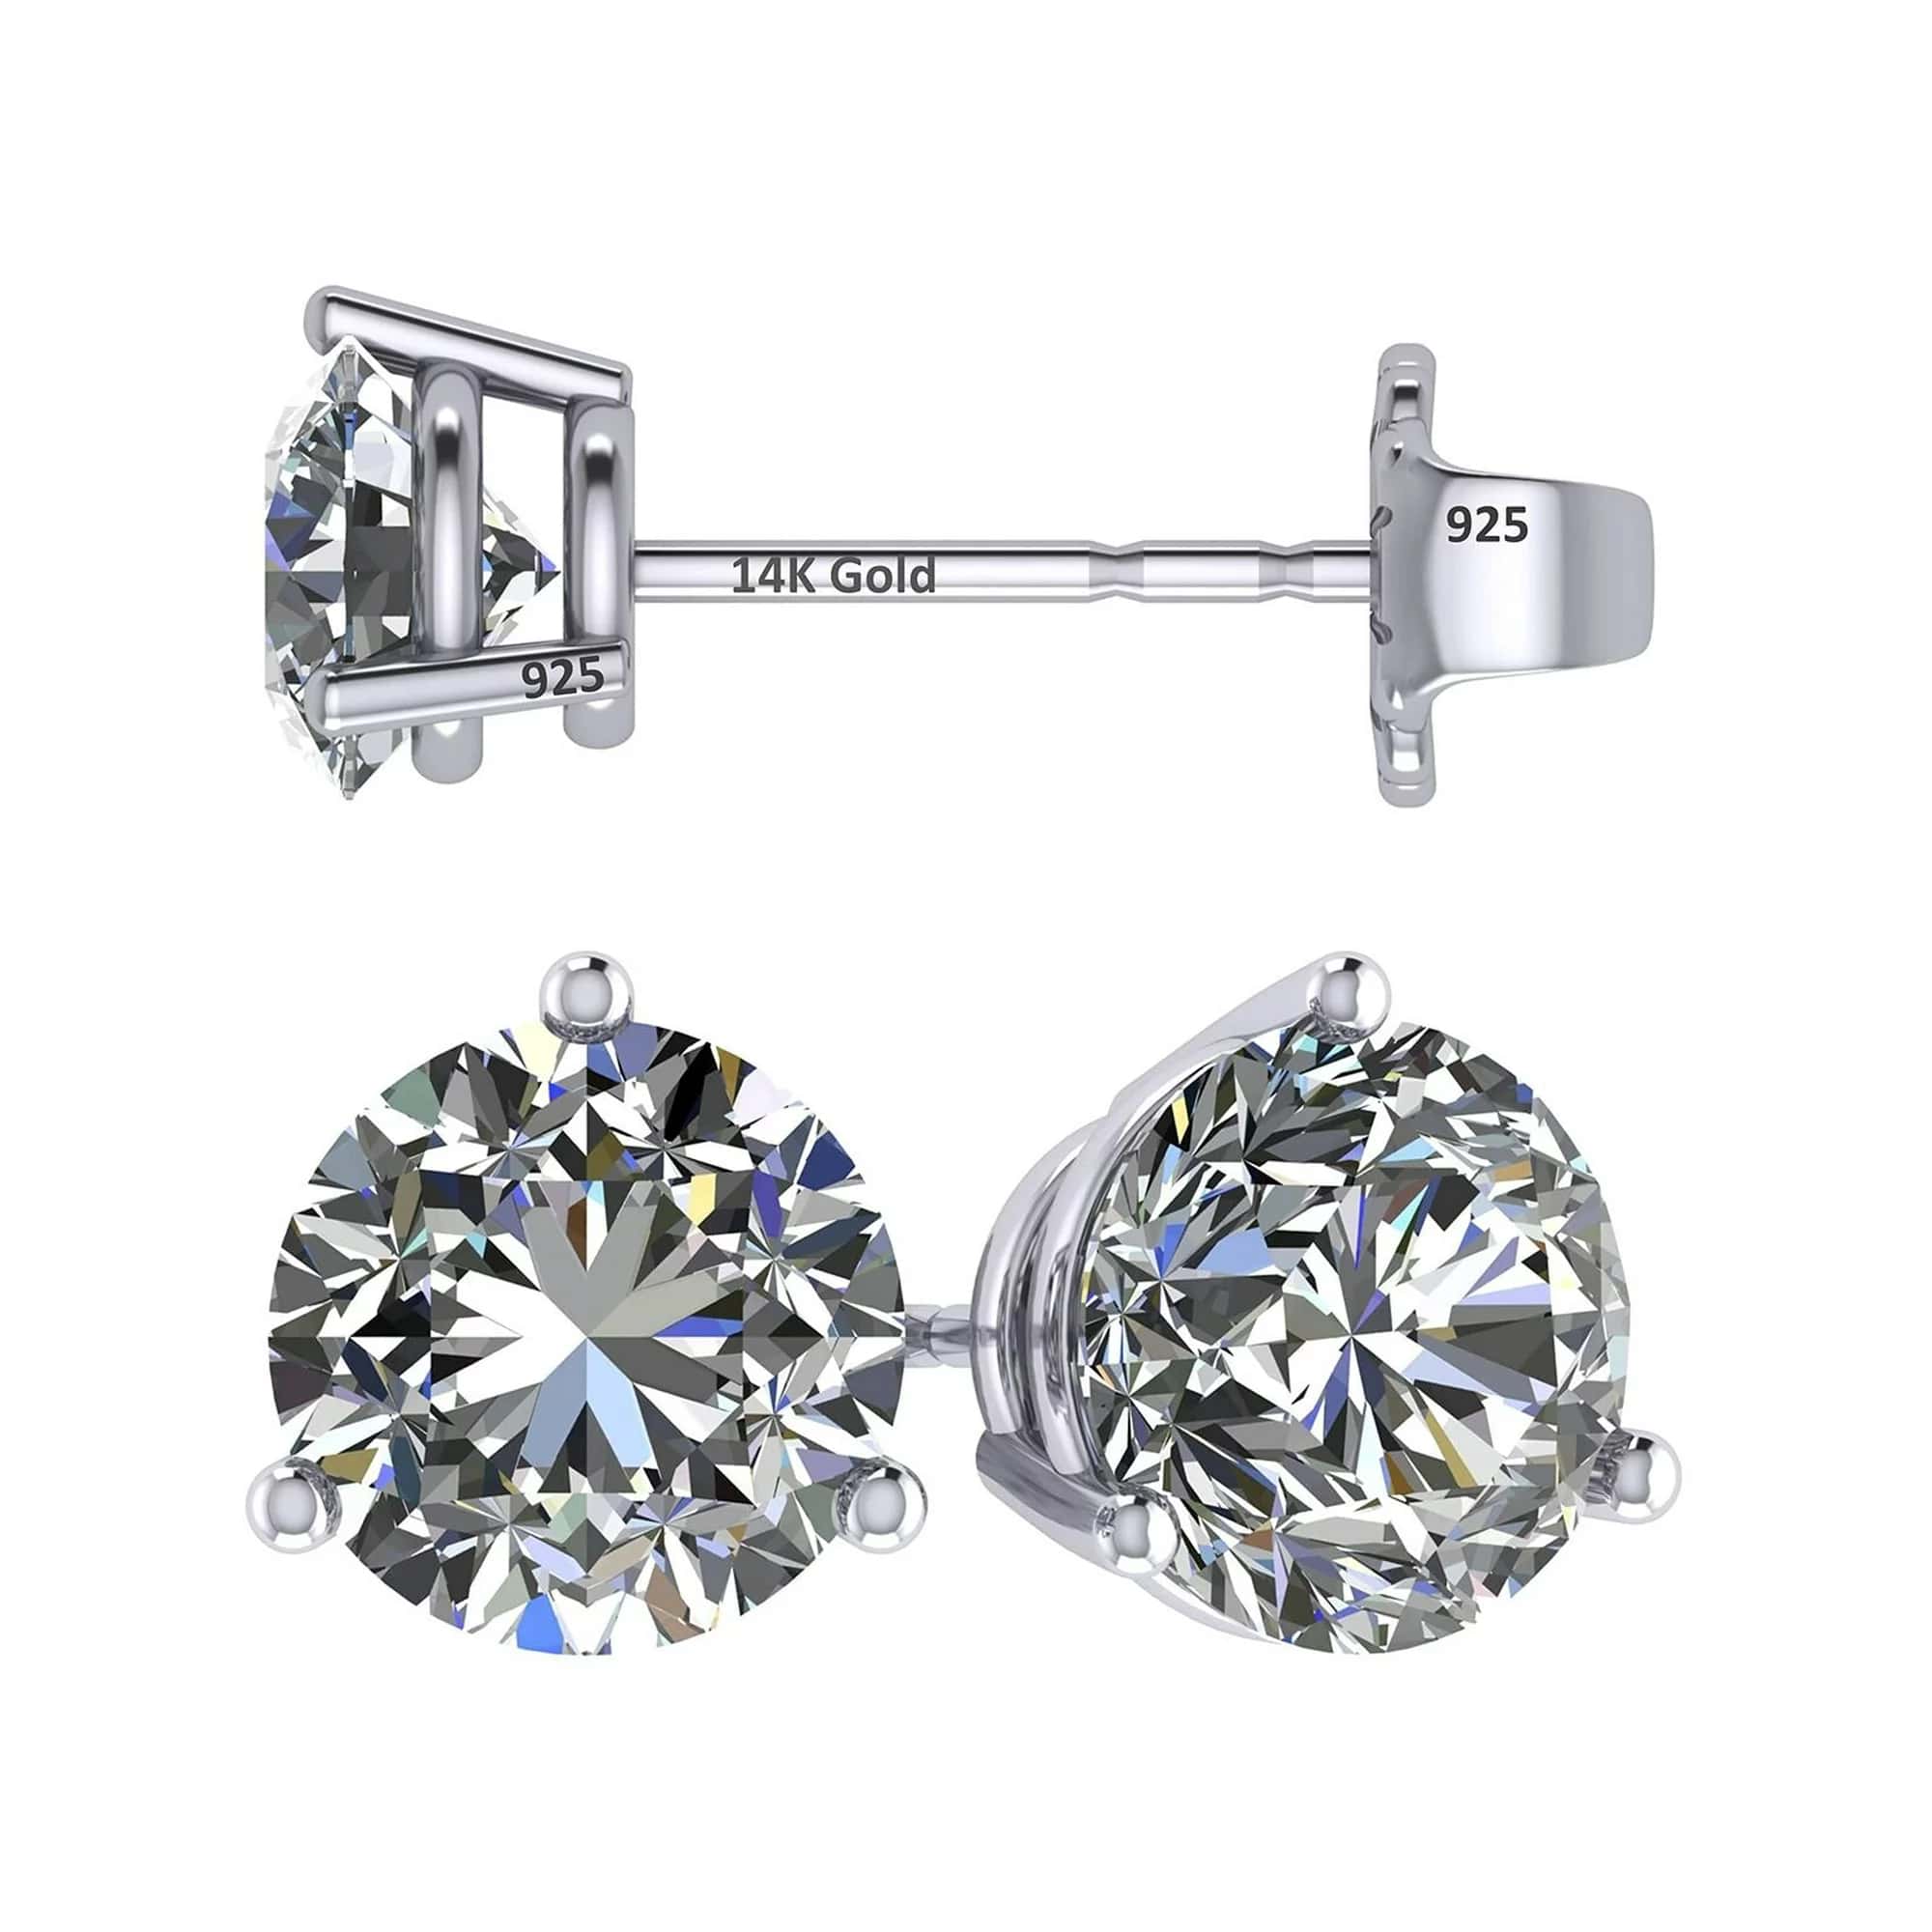  Sparkle in Style: Central Diamond Center 14K Gold CZ Stud Earrings - Platinum Plated 5.50mm